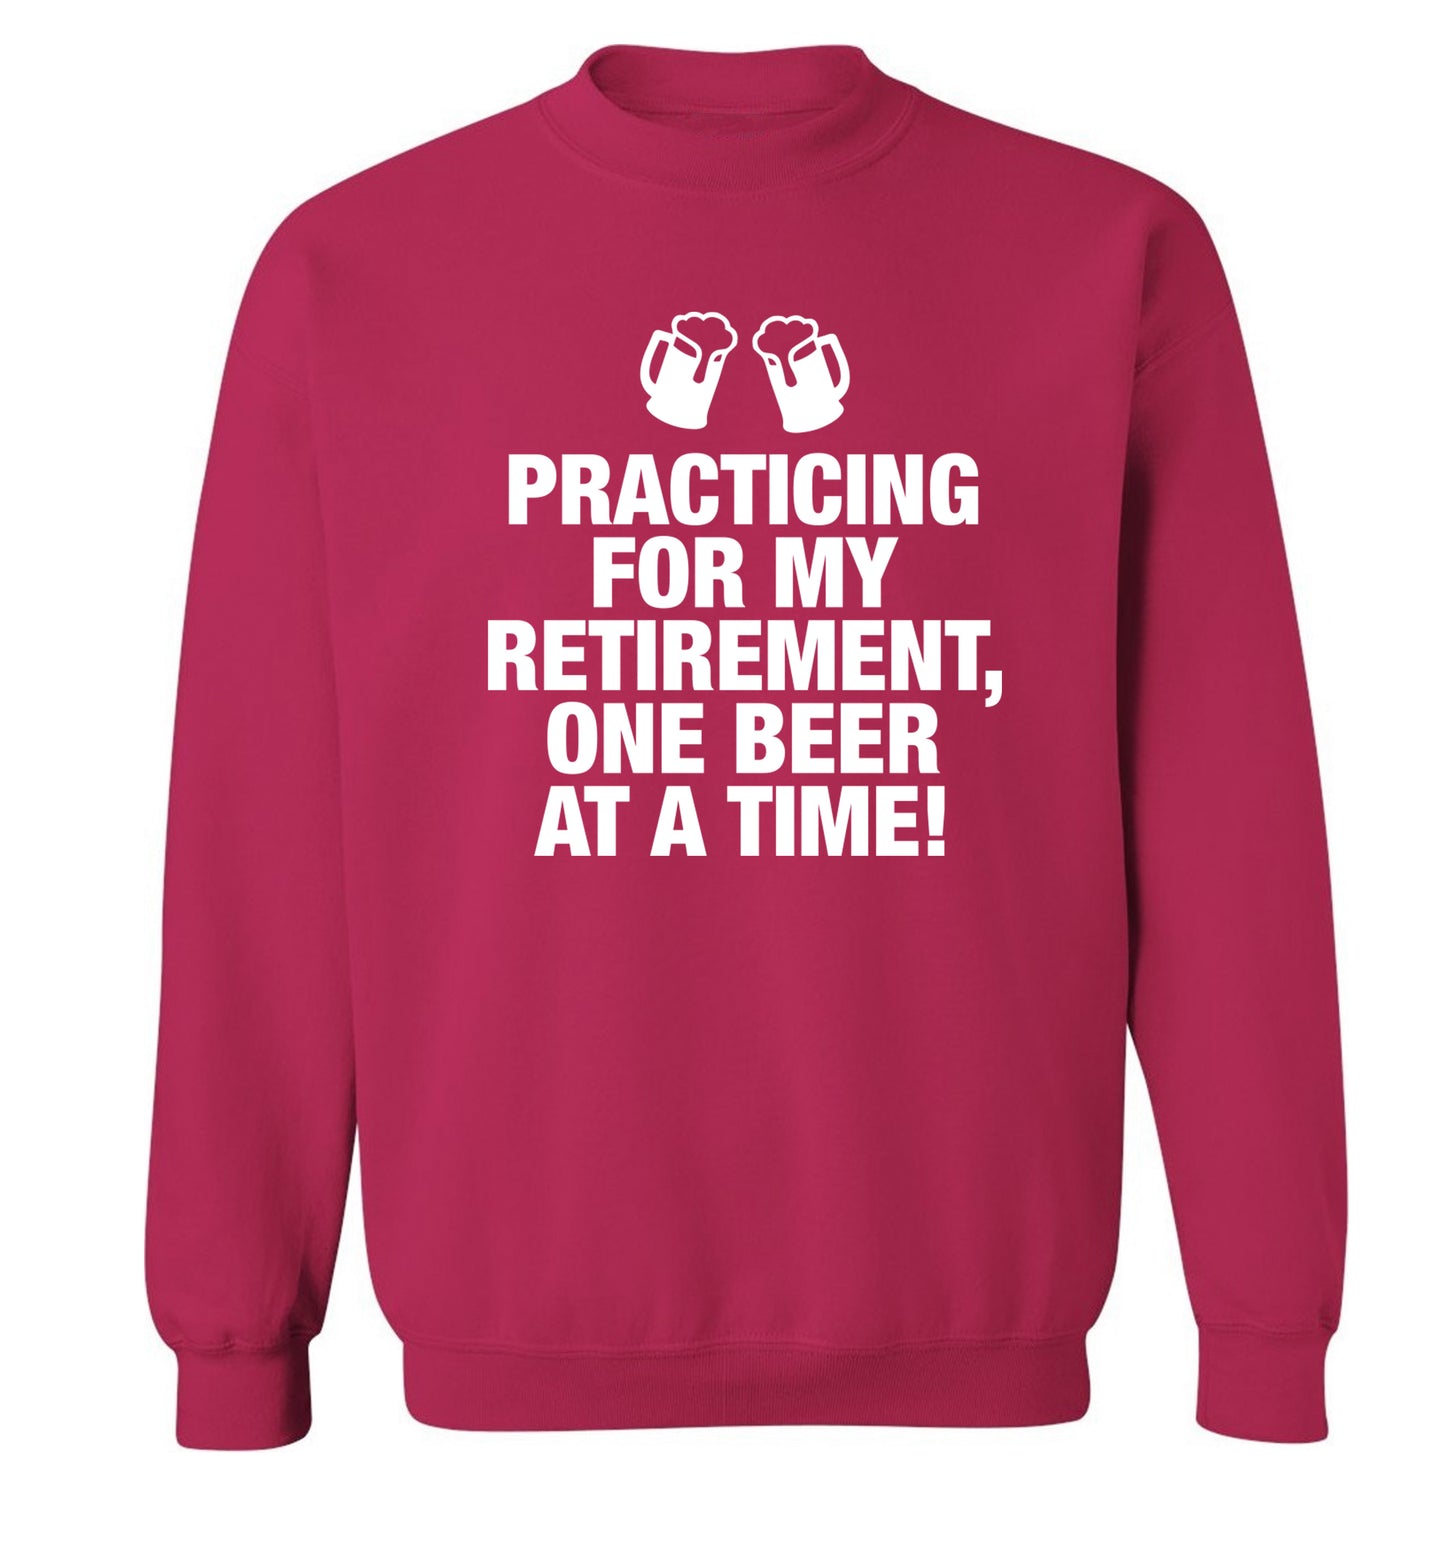 Practicing my retirement one beer at a time Adult's unisex pink Sweater 2XL